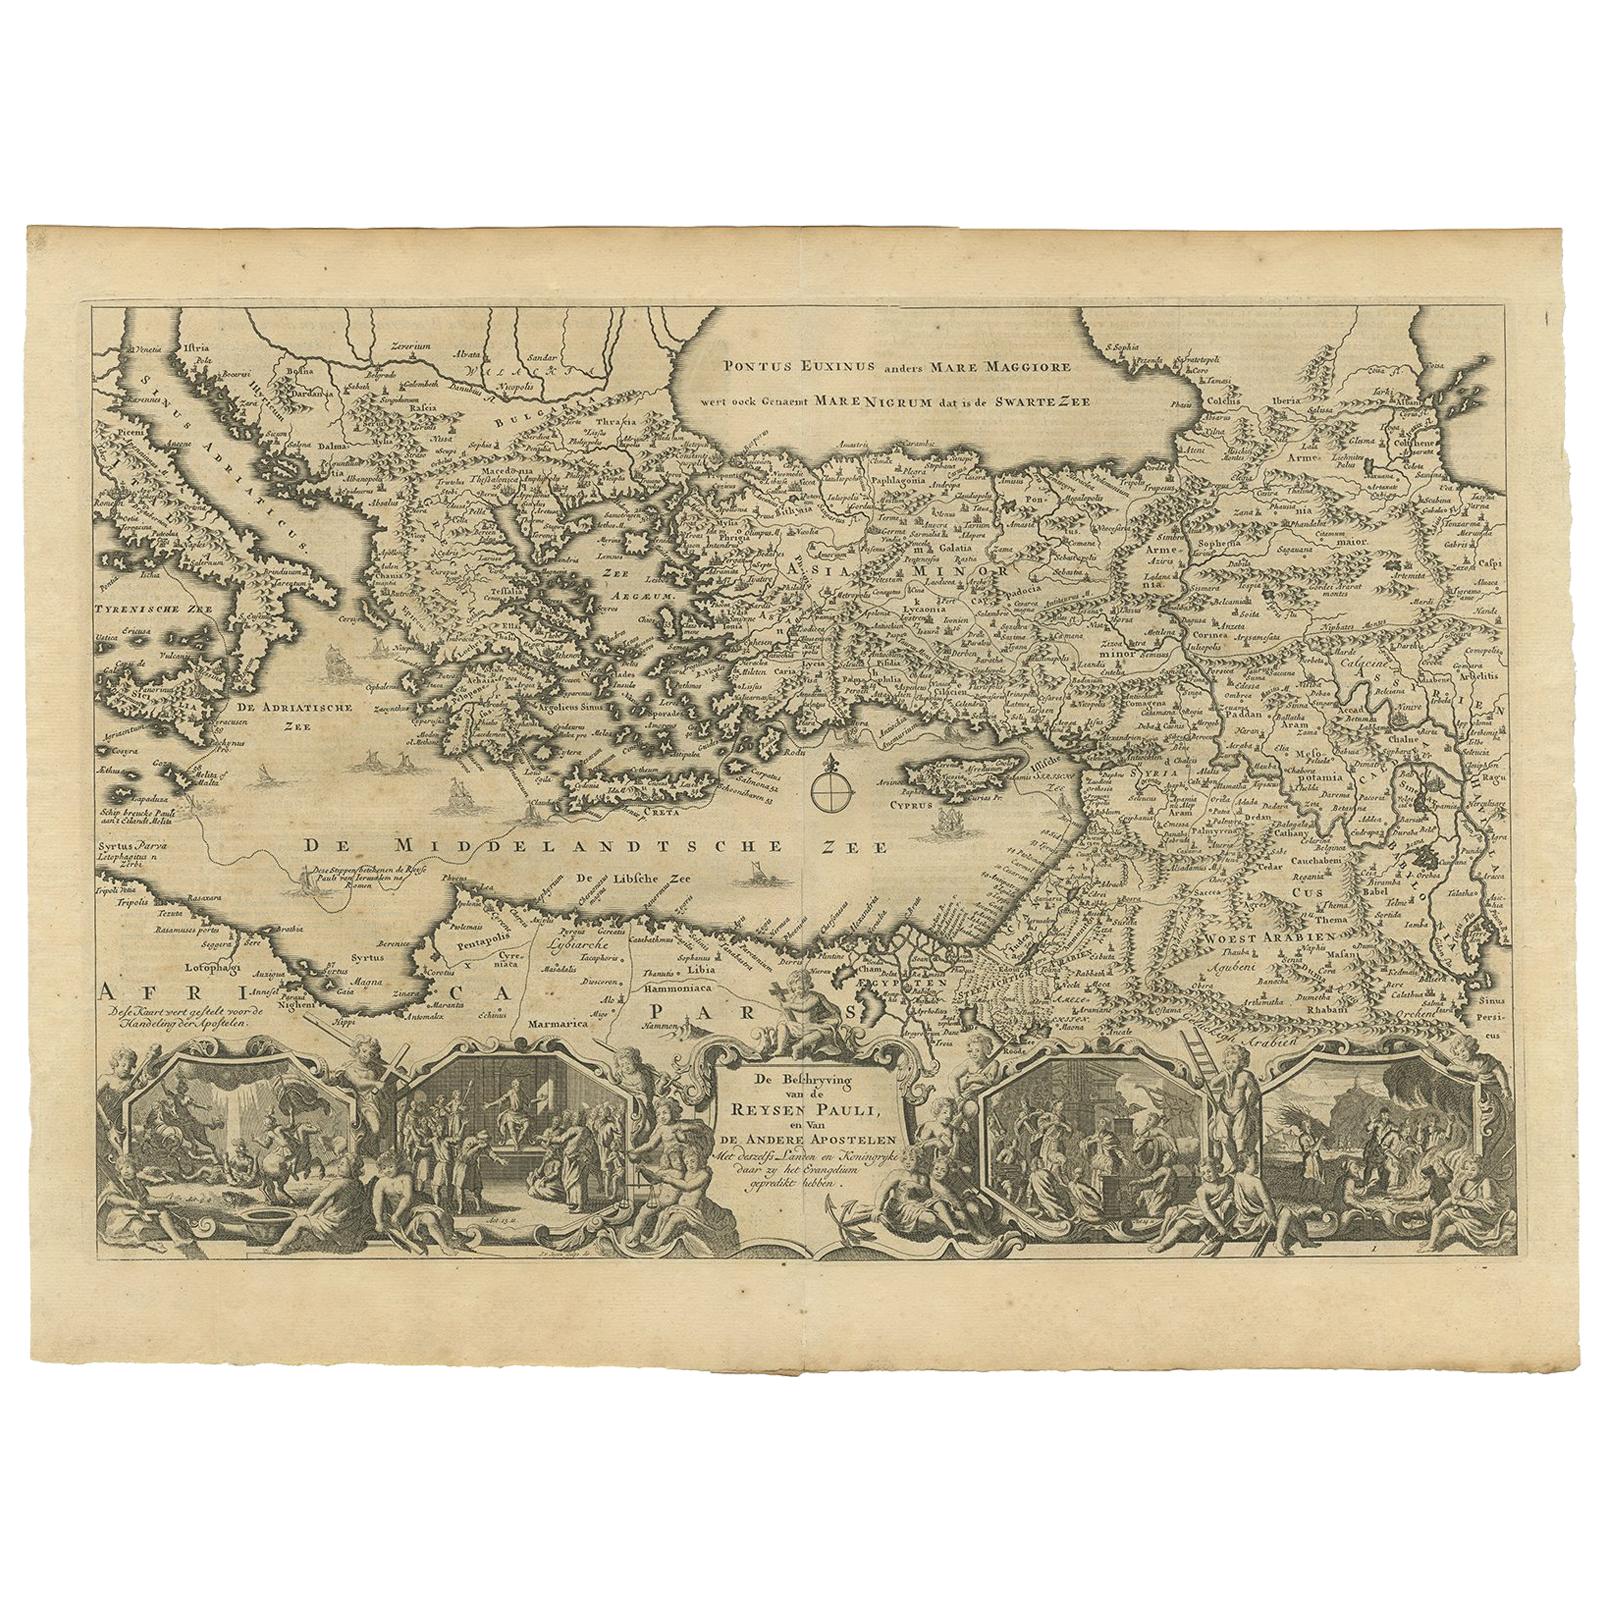 Antique Map Eastern Mediterranean by D. Stoopendaal 'circa 1710'